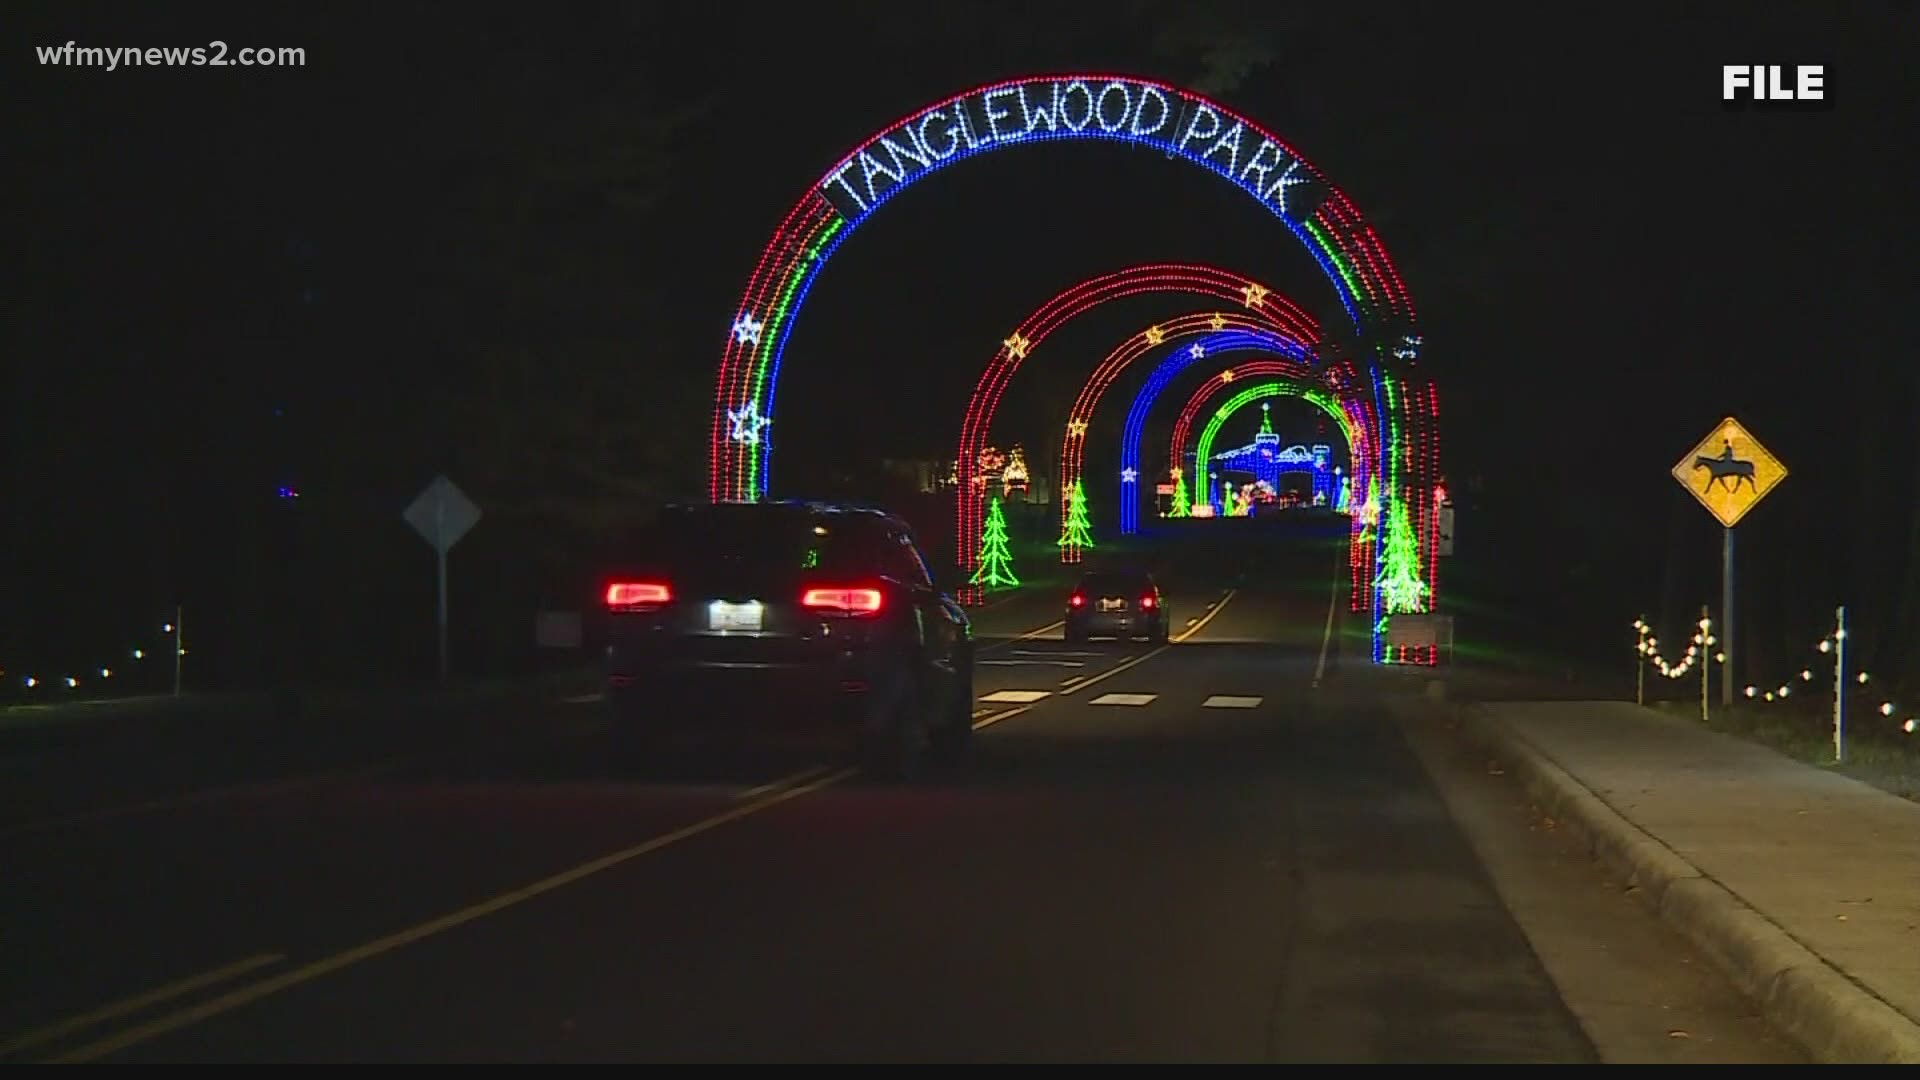 The annual Triad tradition is set to open up this Friday.